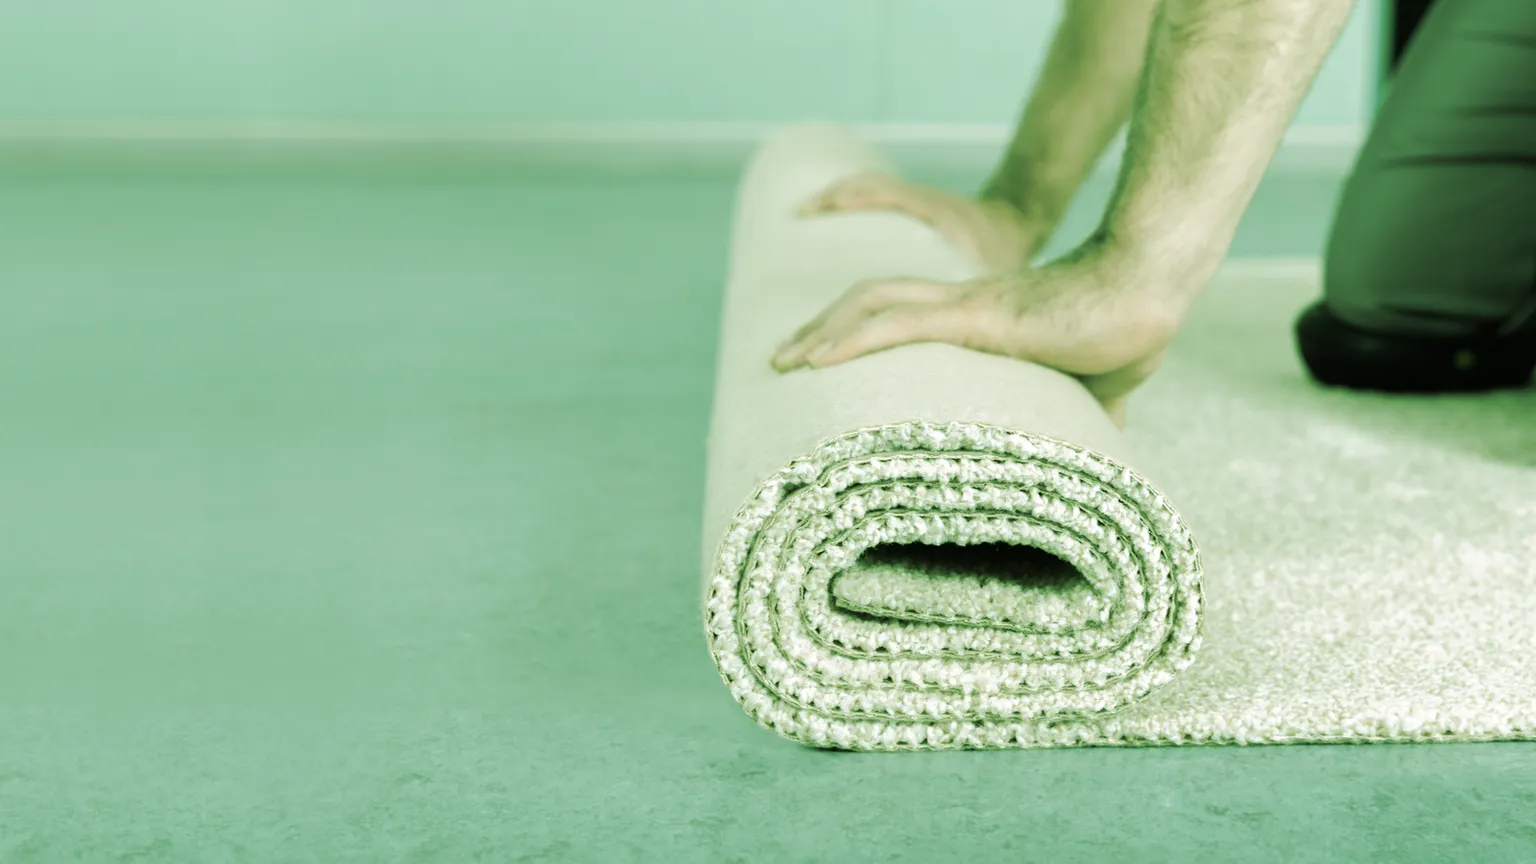 Rug pulls are one of the most common crypto scams. Image: Shutterstock